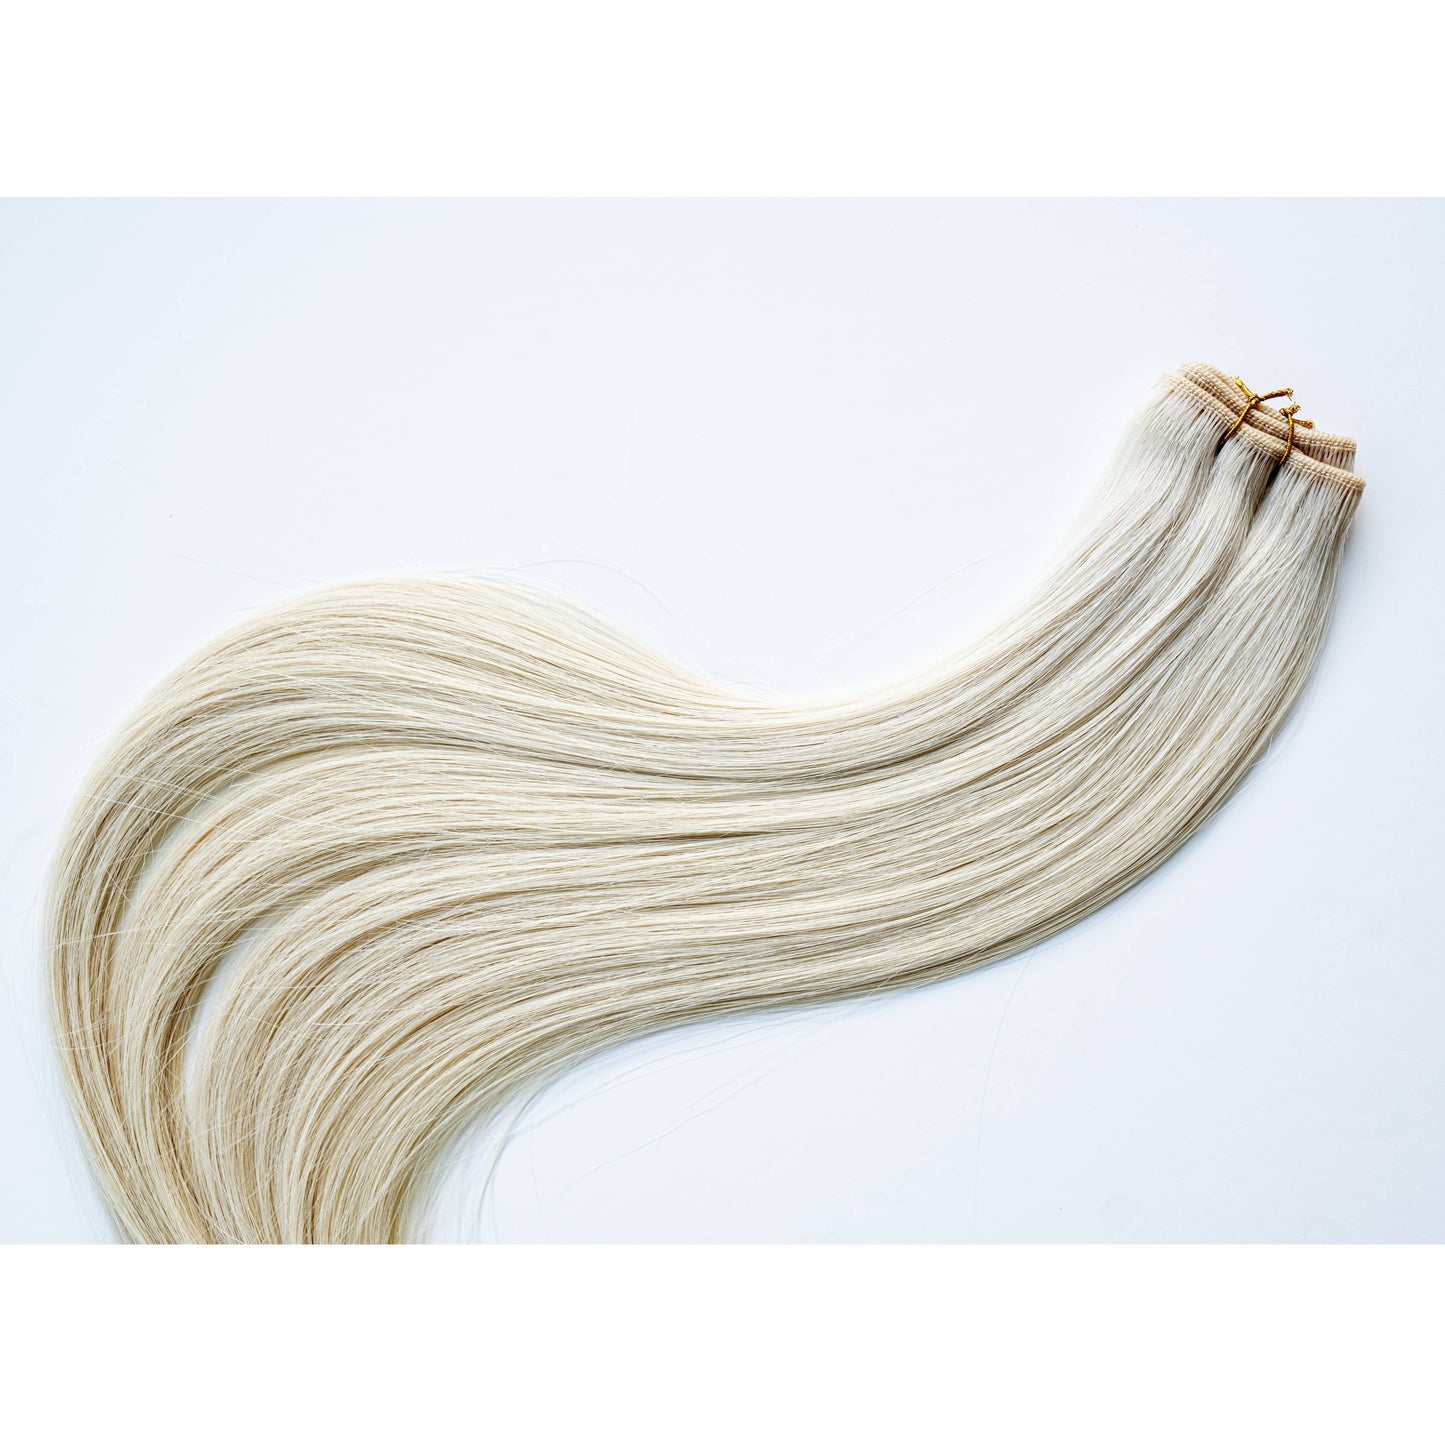 Madeline | Strong Strands Hand-Tied Extensions